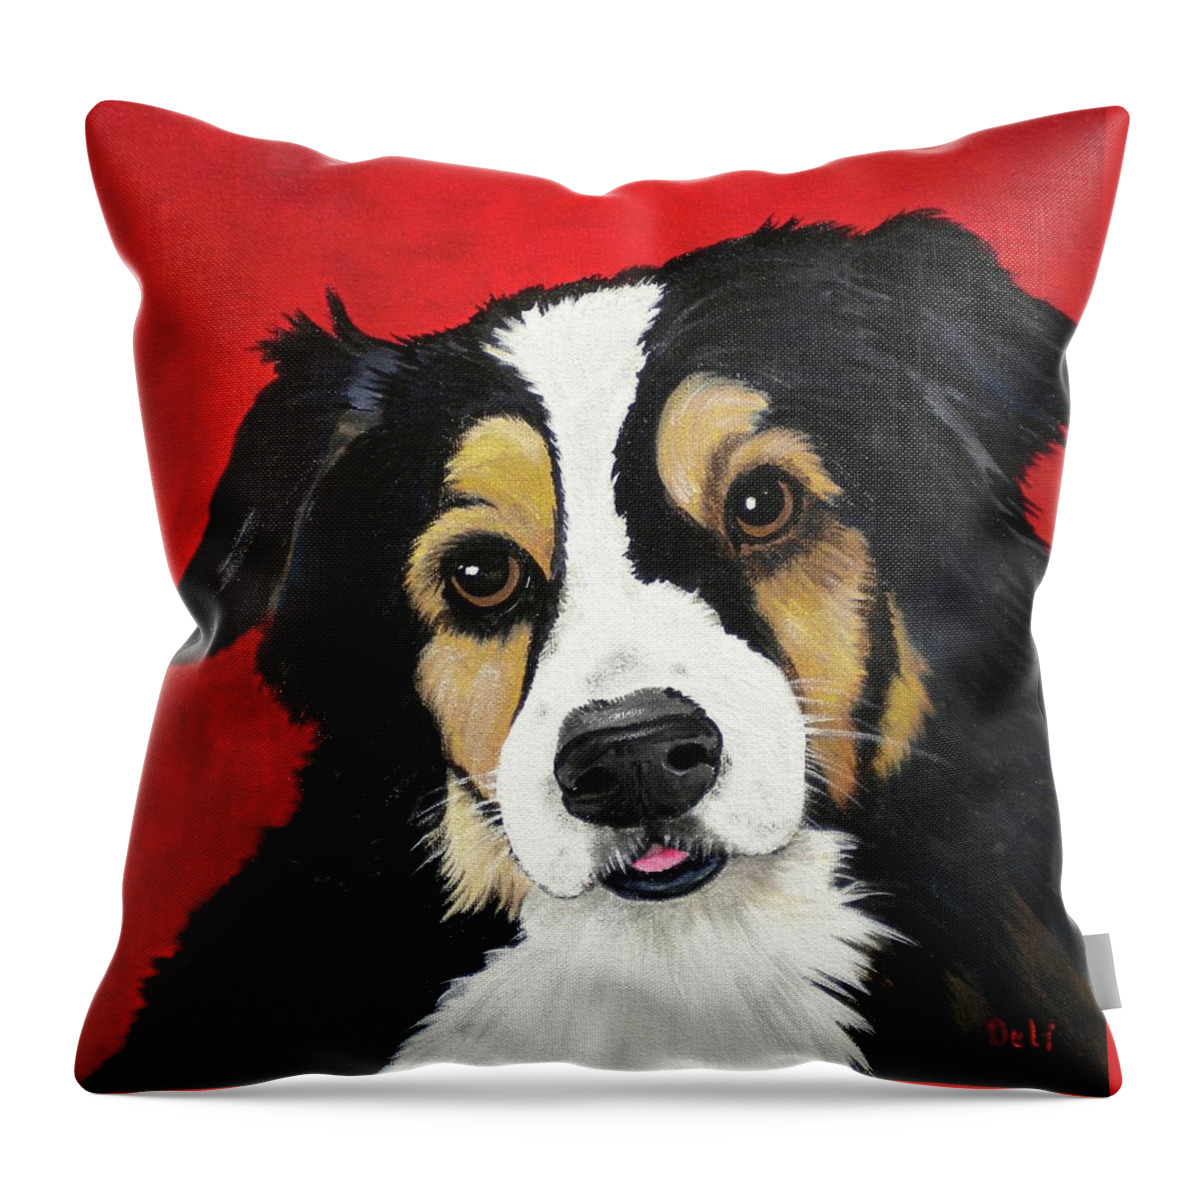 Sweet Scout Throw Pillow featuring the painting Sweet Scout by Debi Starr